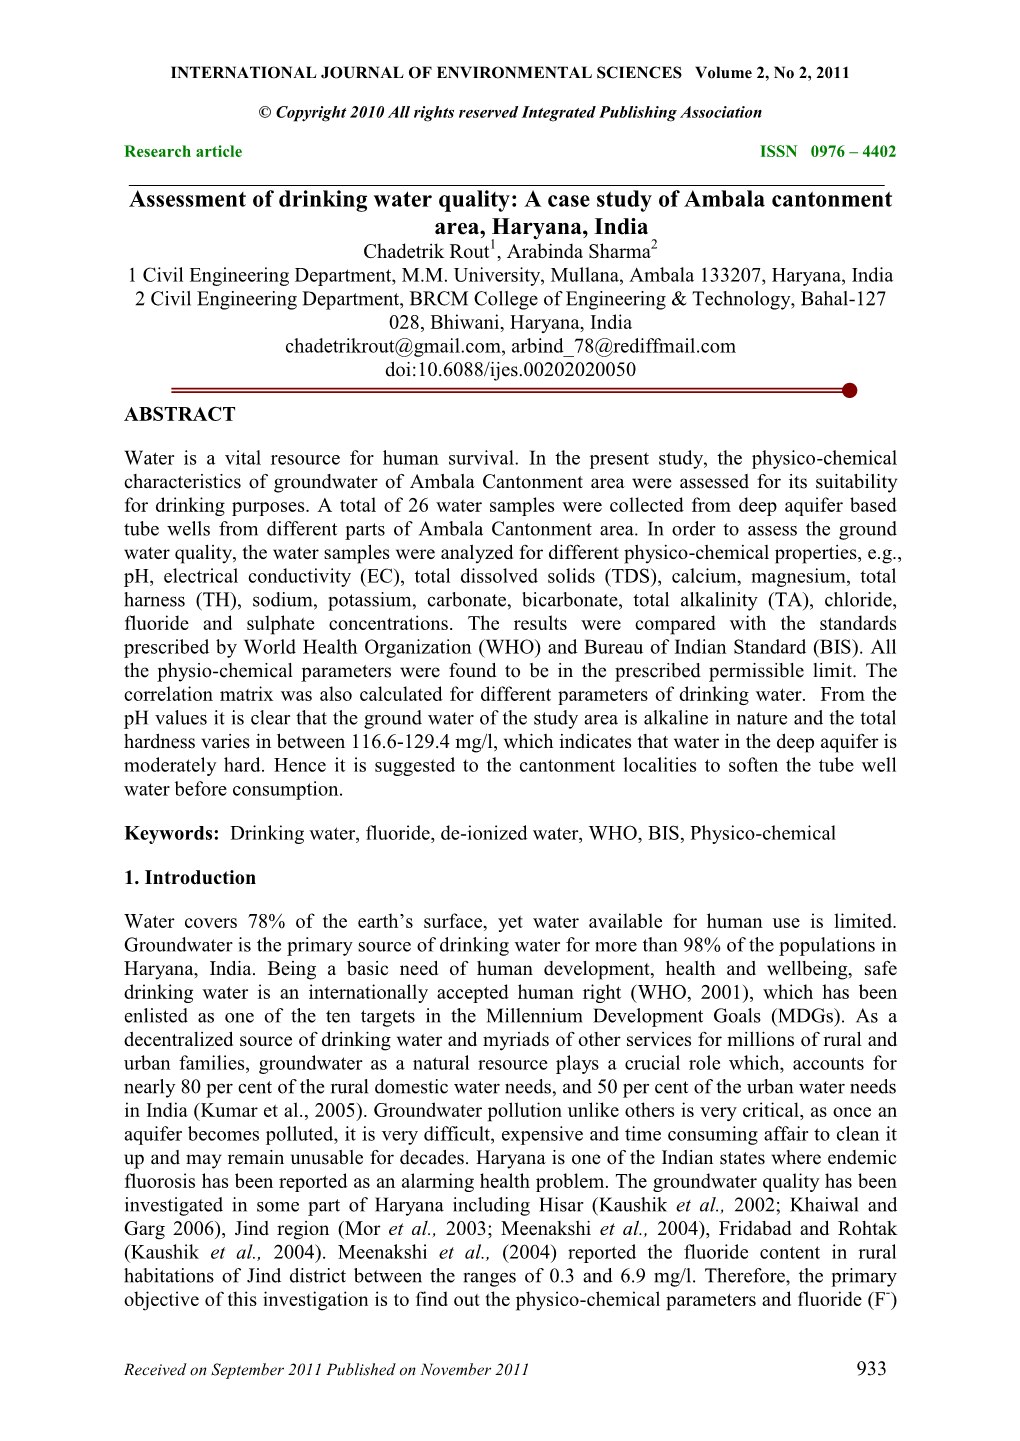 Assessment of Drinking Water Quality: a Case Study of Ambala Cantonment Area, Haryana, India Chadetrik Rout1, Arabinda Sharma2 1 Civil Engineering Department, M.M